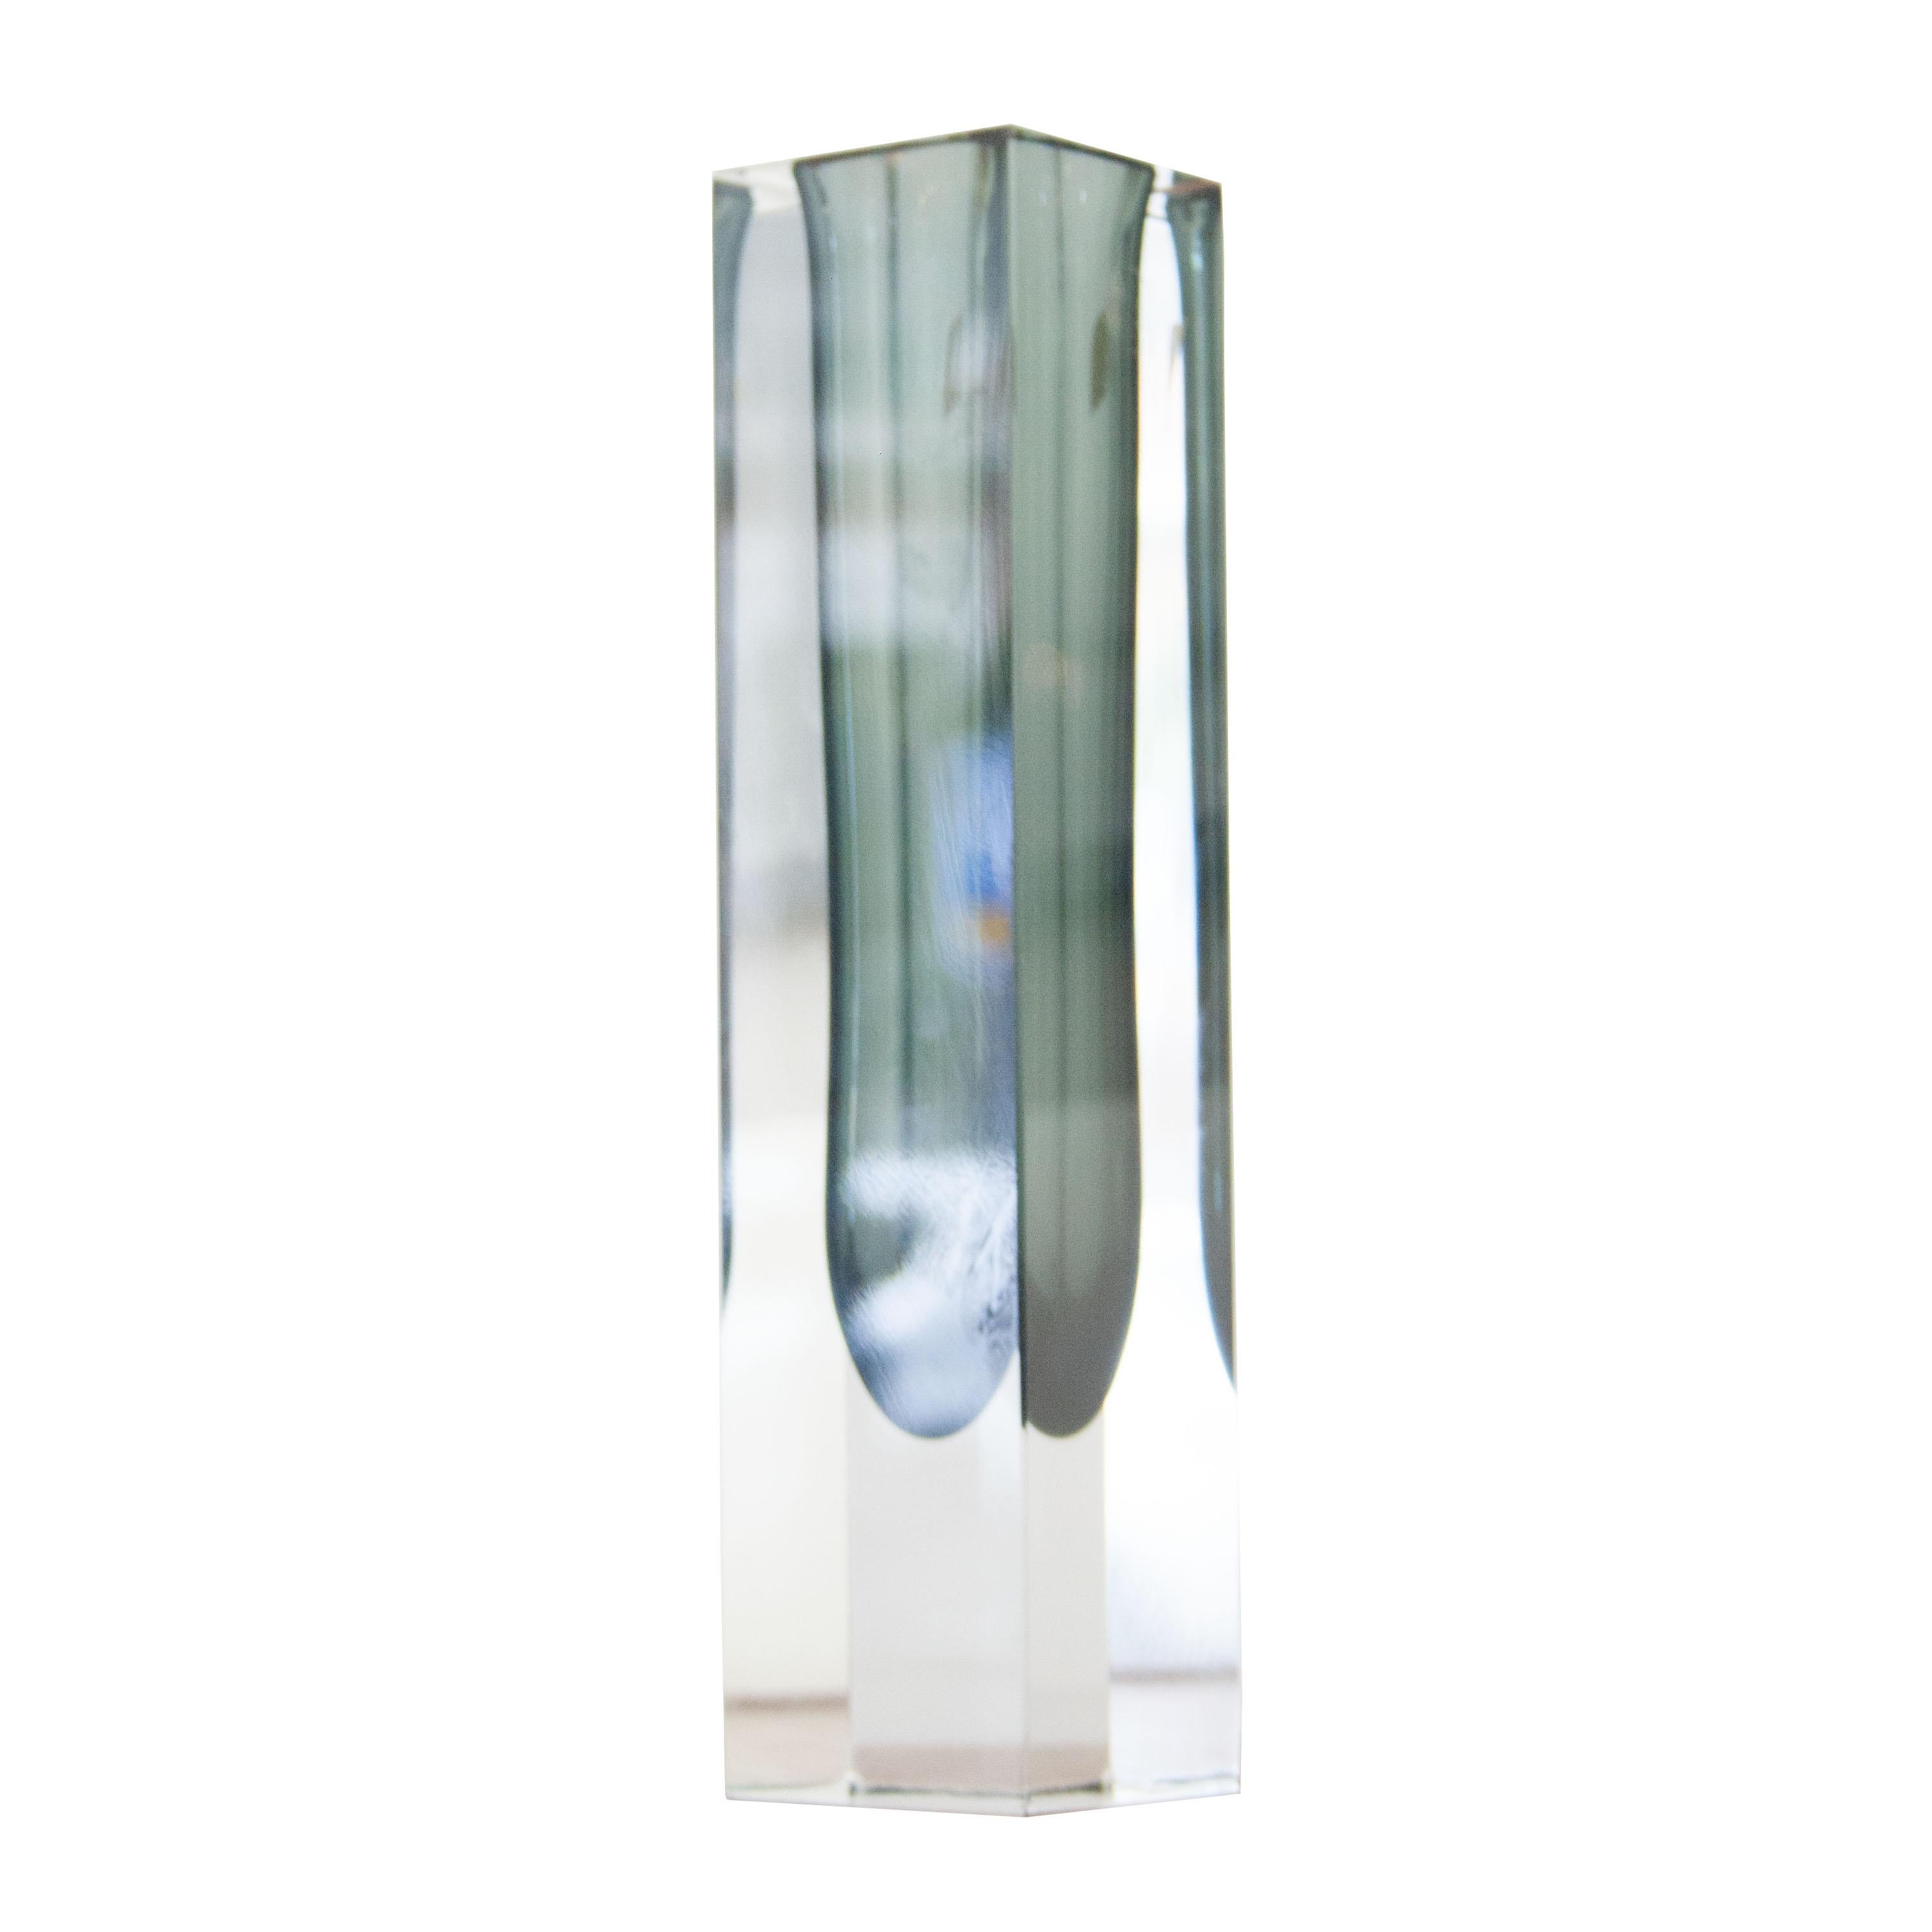 Italian vase designed by Flavio Poli and edited by Mandruzzato. Hand-crafted faceted Murano glass in grey.